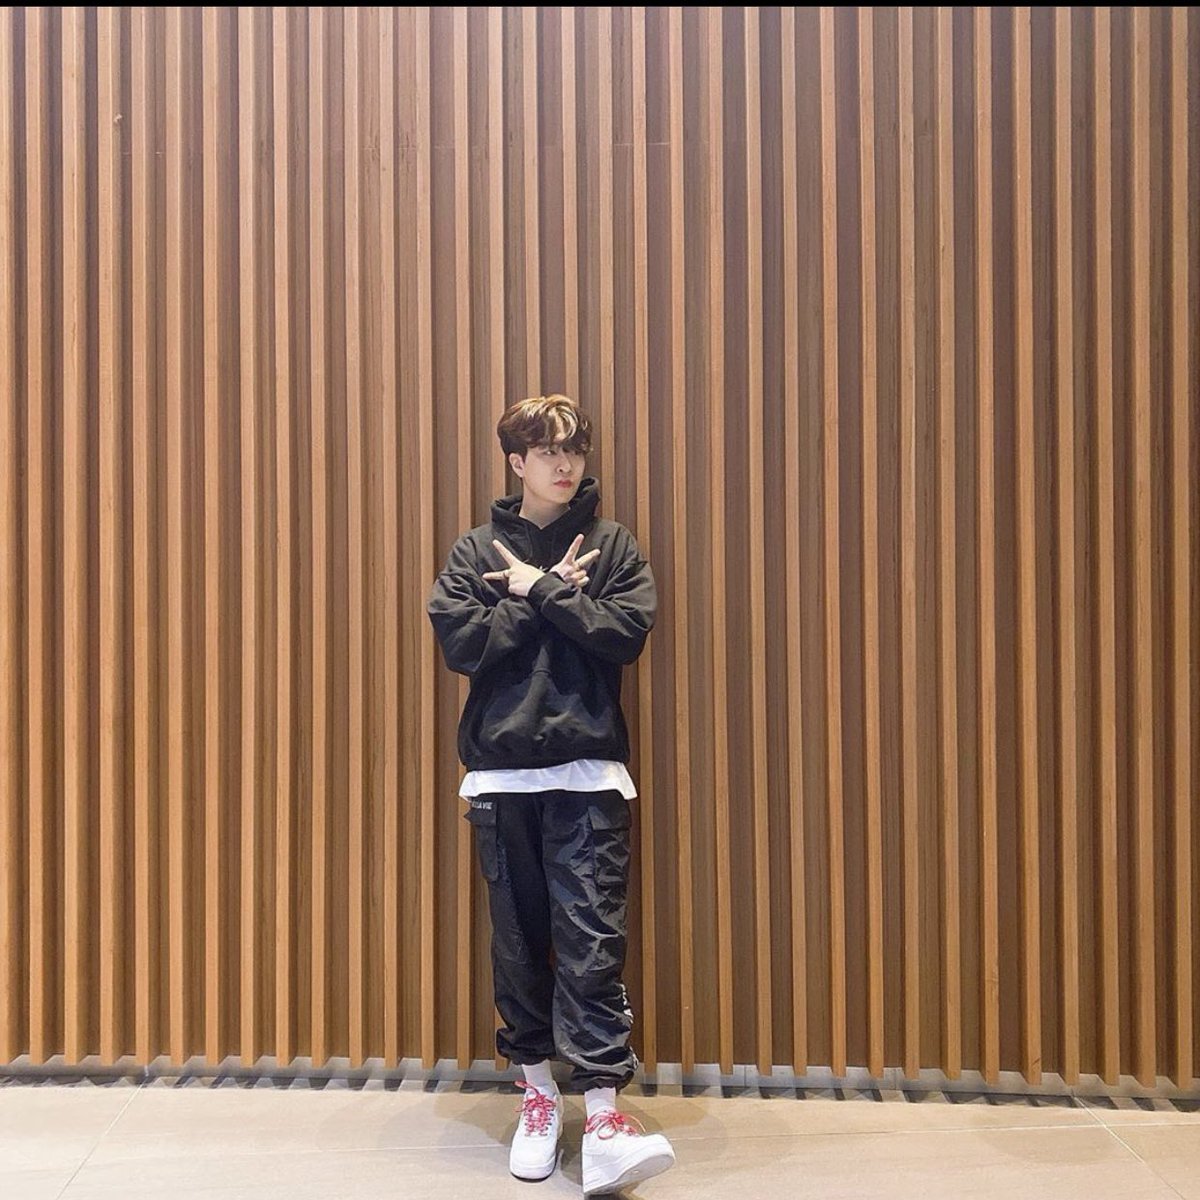  http://arsxcoco.com  | i bet this wall is right in front of the idol radio room!